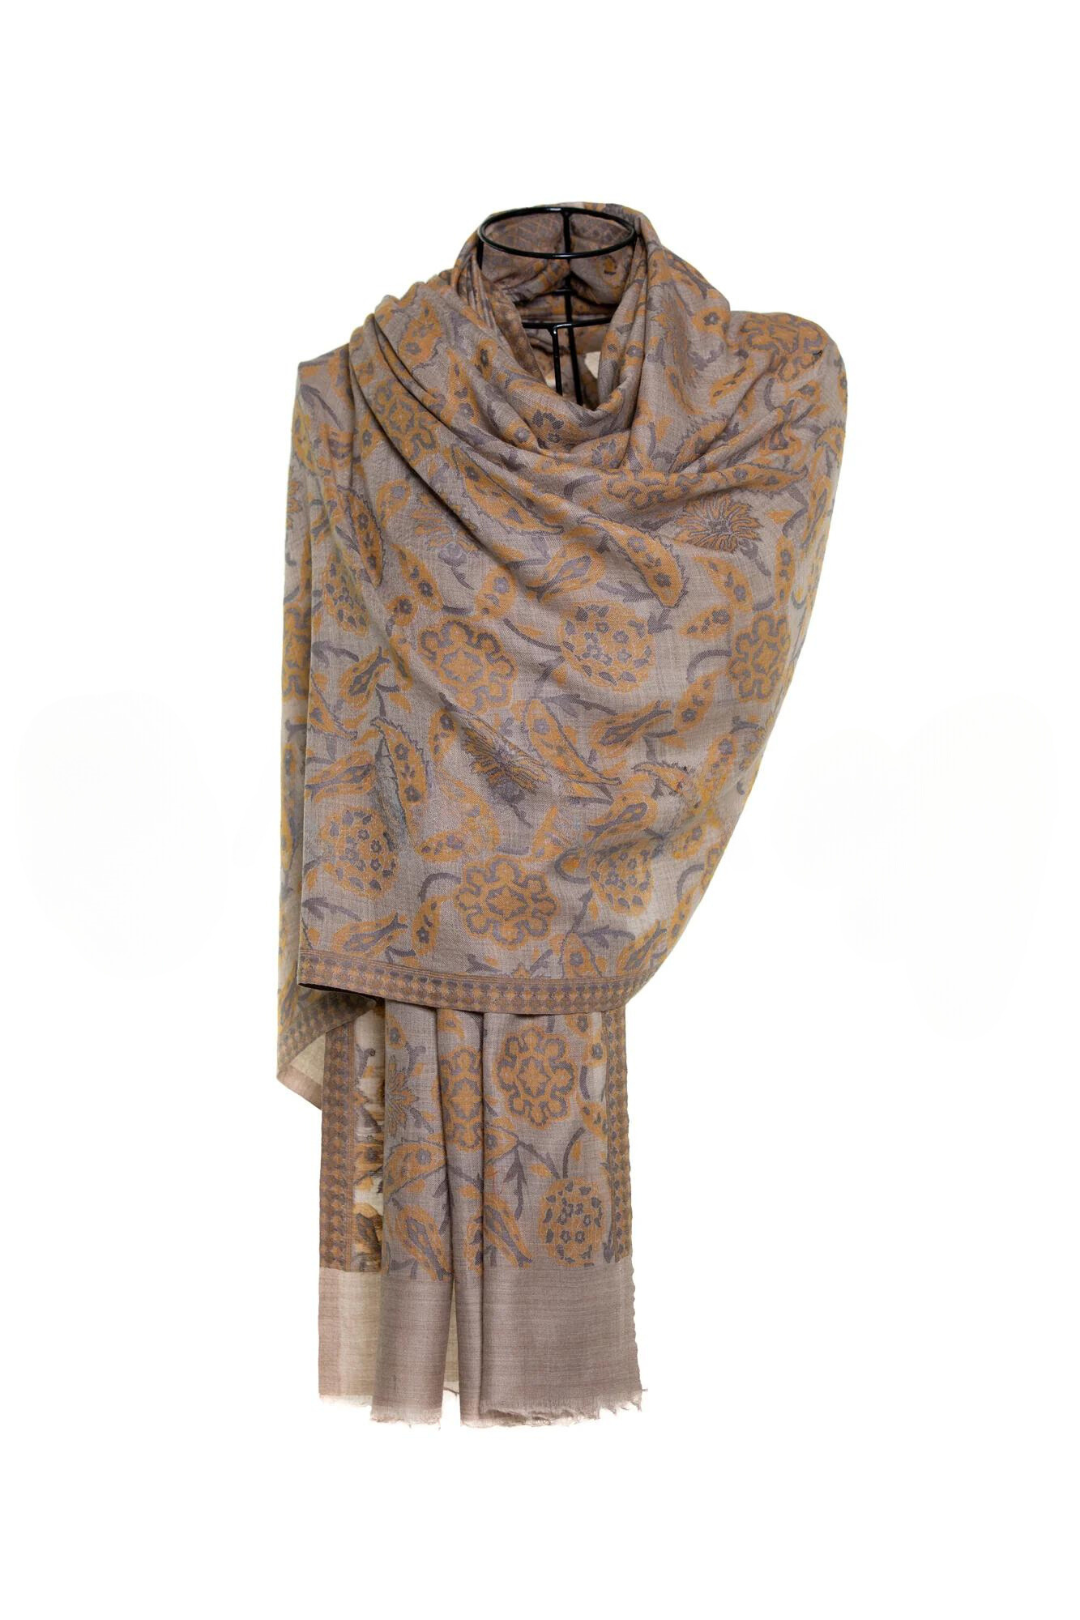 Abstract Floral Paisley Cashmere Pashmina Shawl - Mustard